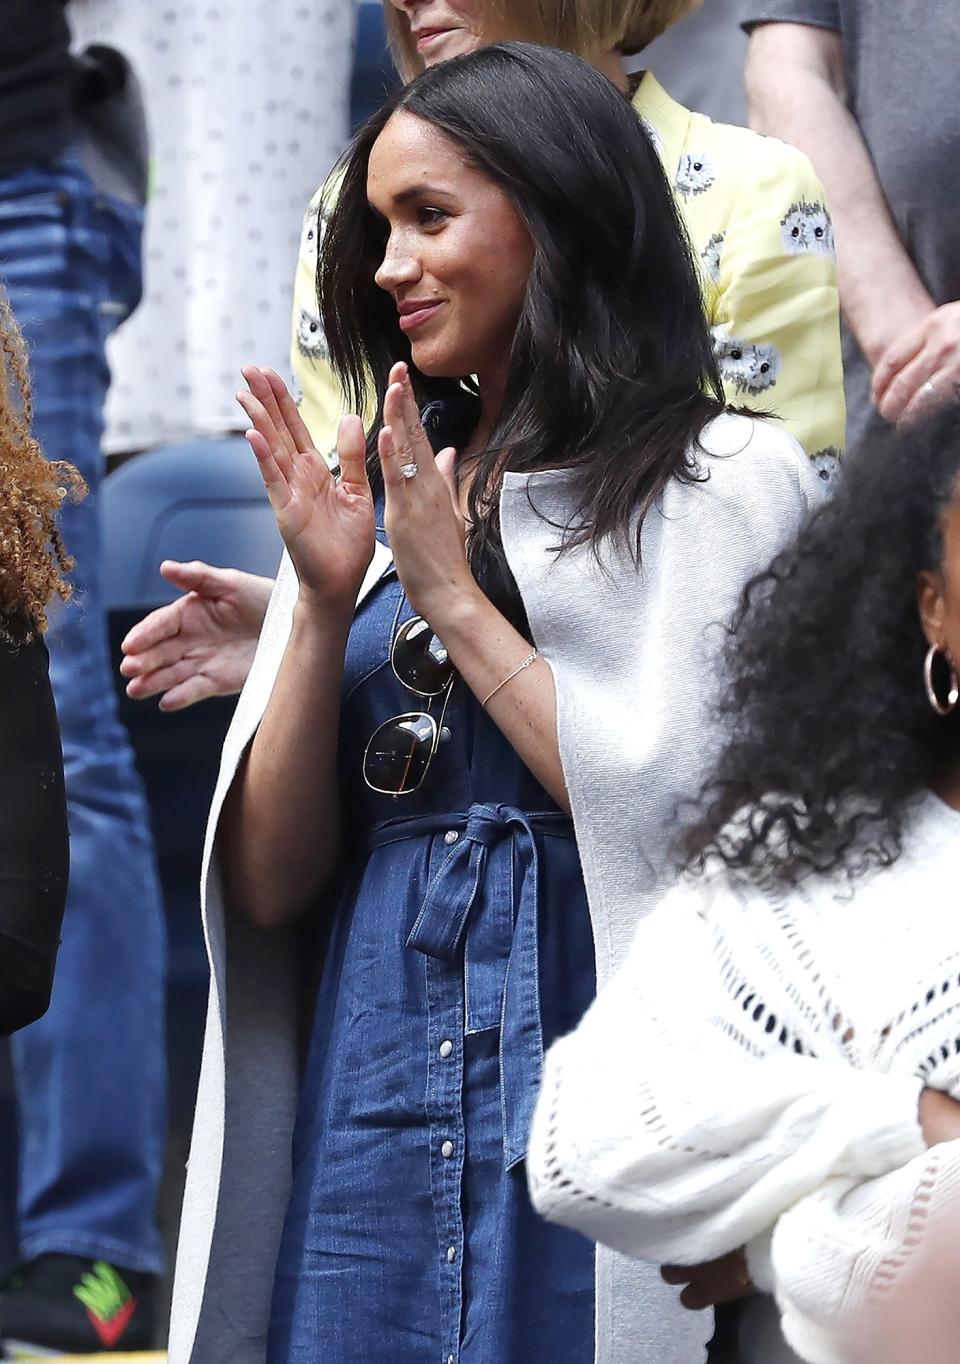 The Duchess of Sussex cheered on Williams dressed in a mid-length, button-down, denim dress with a tie belt from J. Crew.